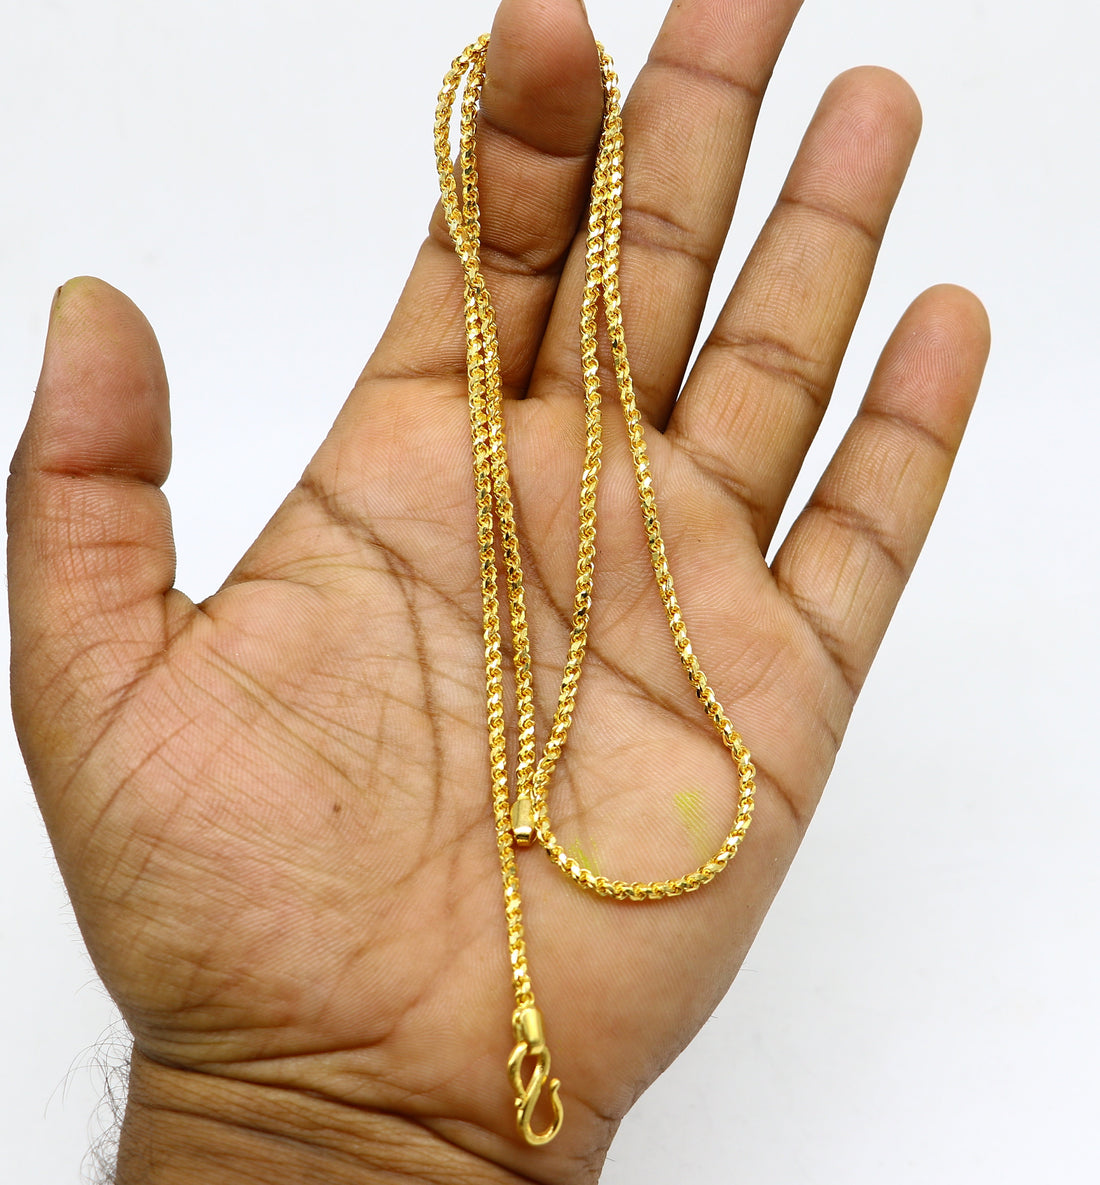 Solid 22k yellow gold handmade fabulous Rope chain necklace excellent gold unisex chain certified best gifting jewelry men's girls gch578 - TRIBAL ORNAMENTS